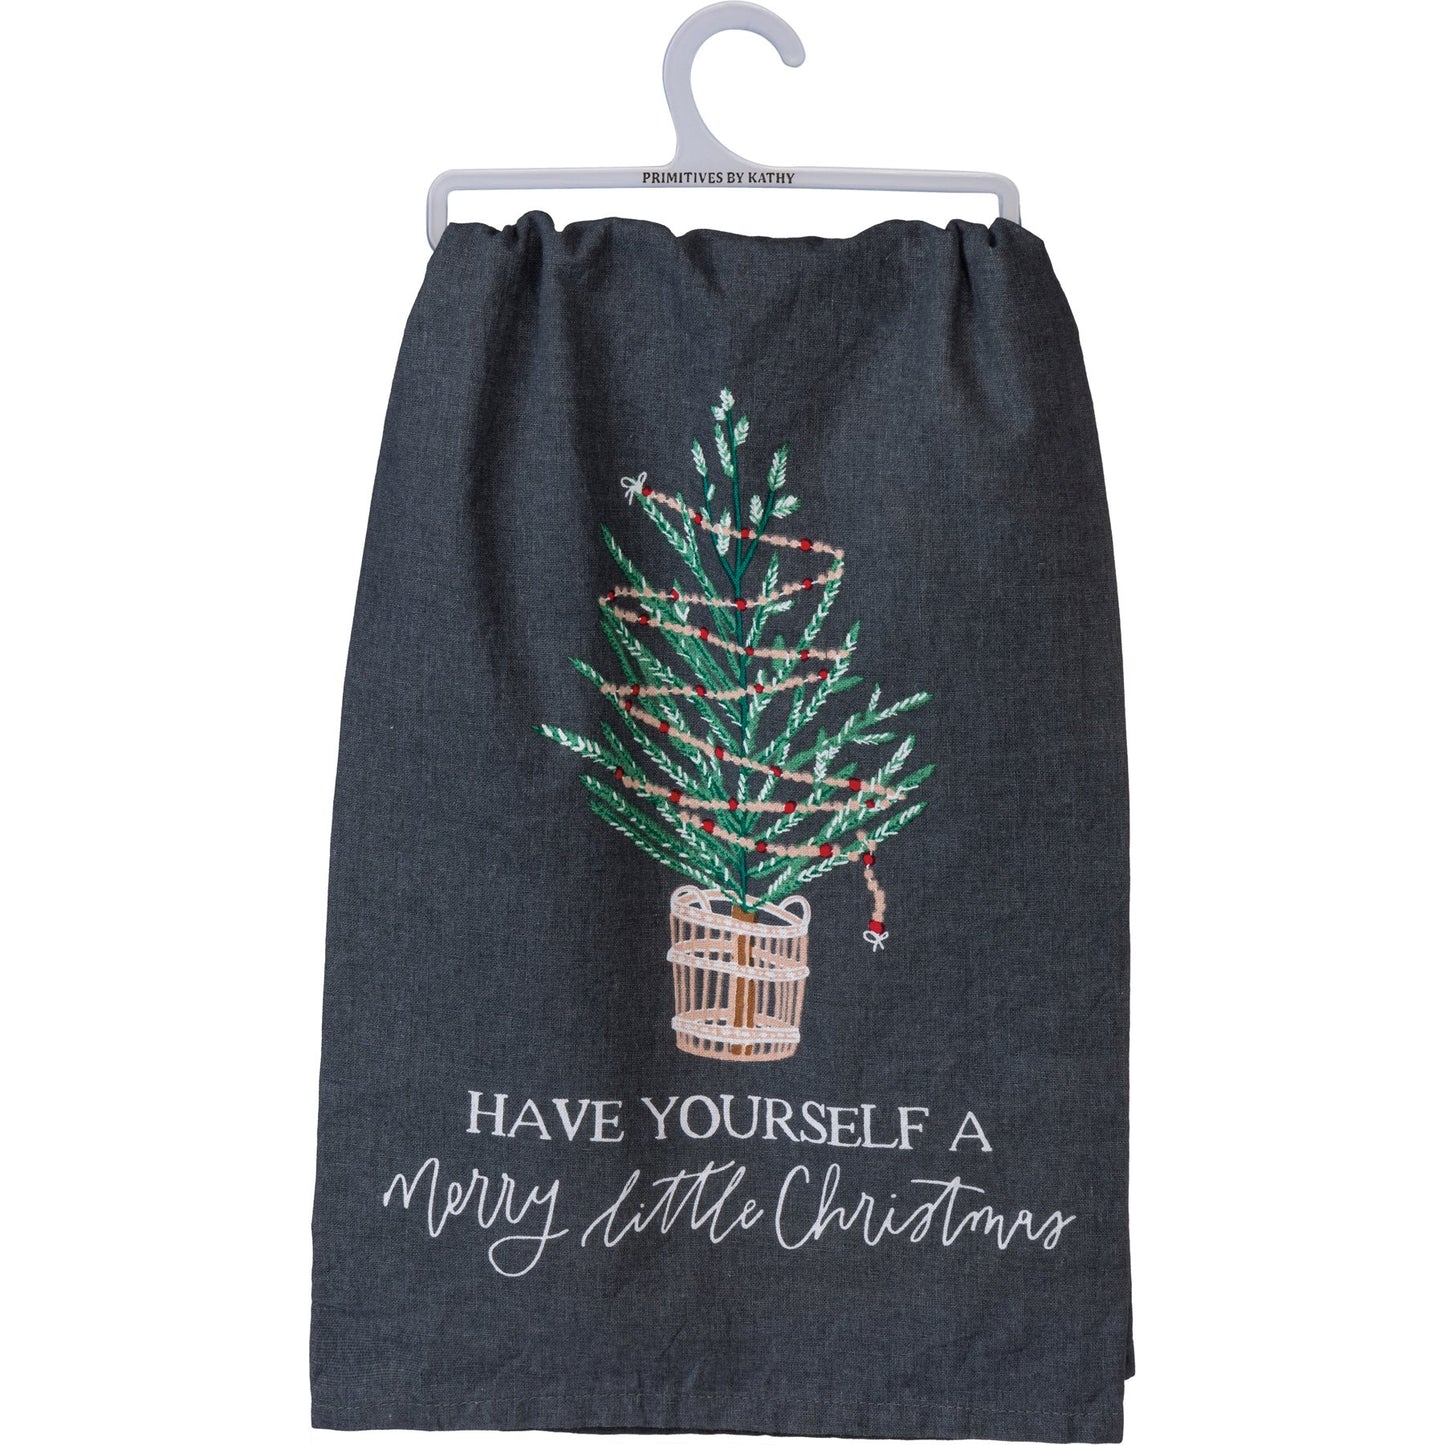 Have Yourself a Merry Little Christmas Kitchen Towel (Black)